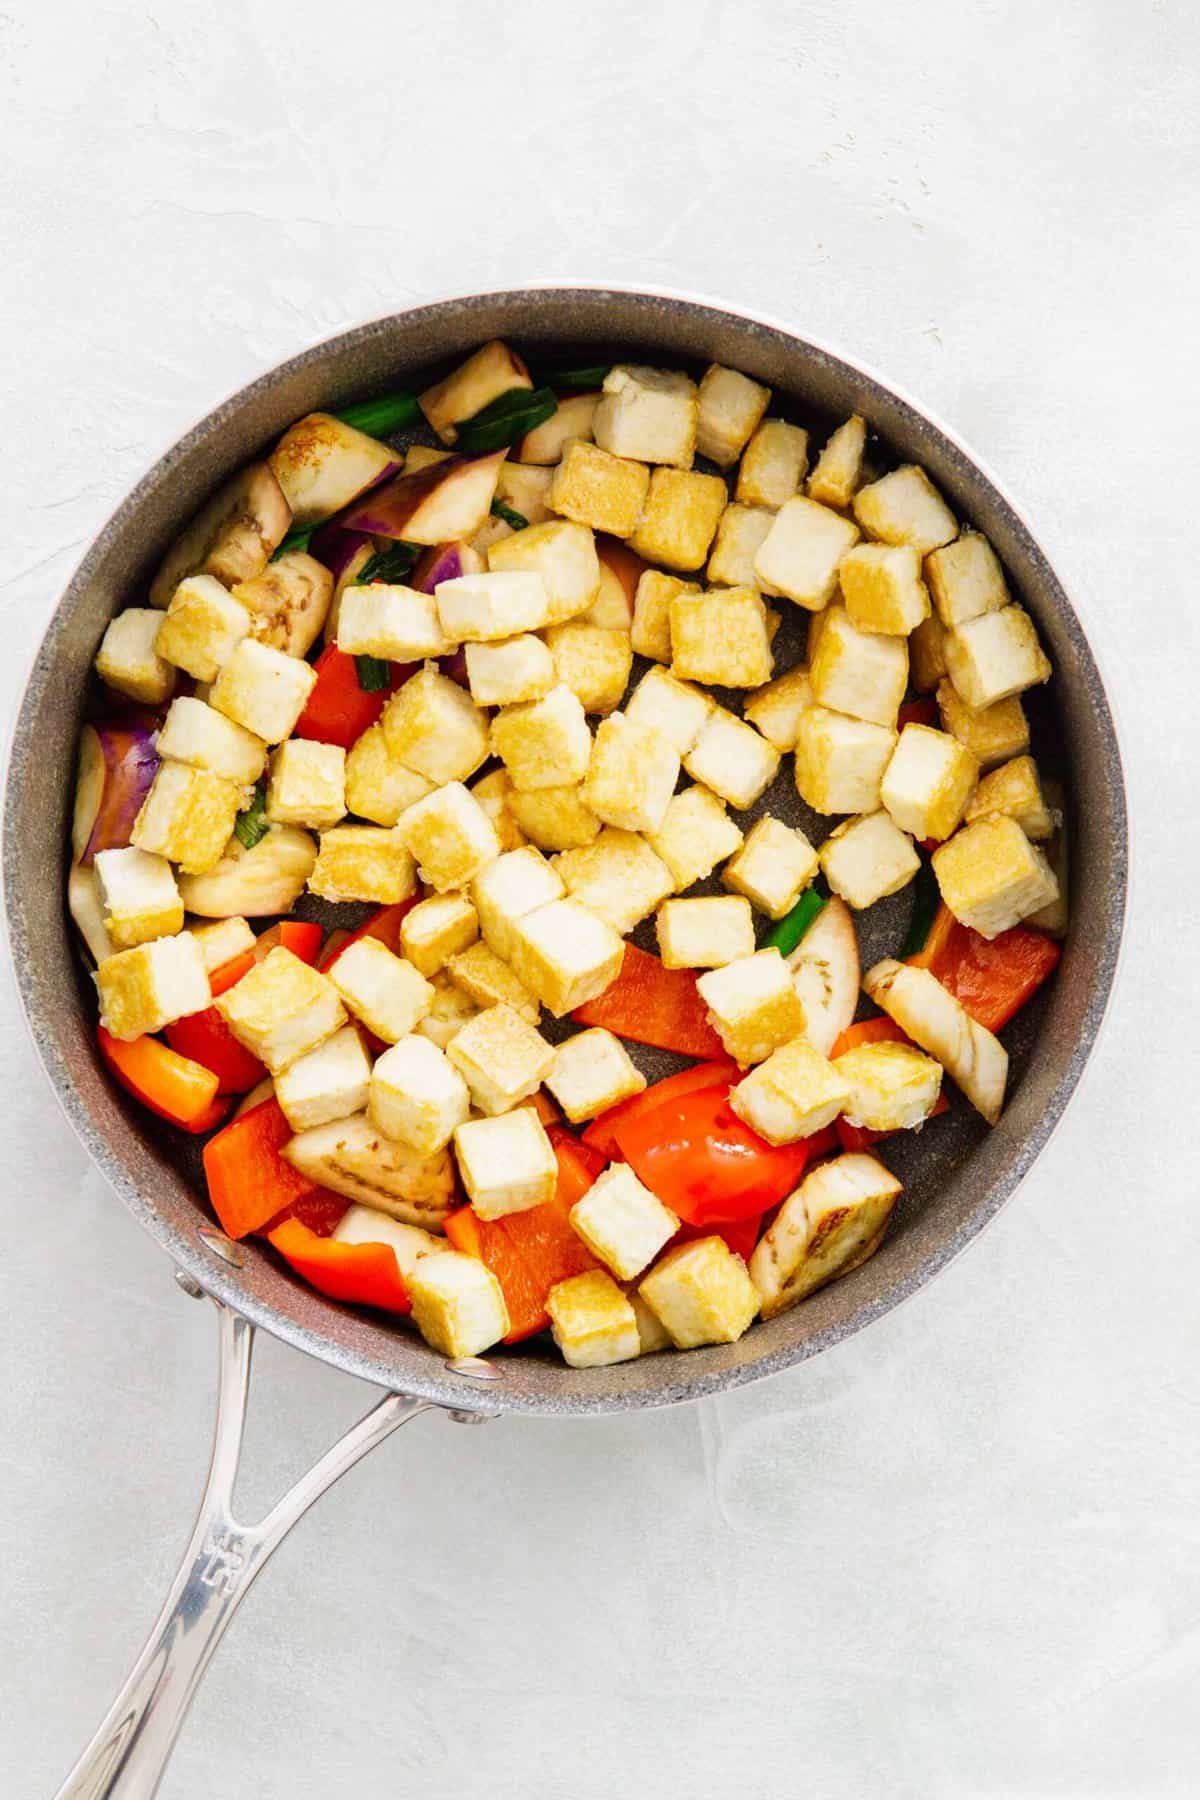 crisped tofu added to the skillet with the eggplant, red bell pepper, and scallions